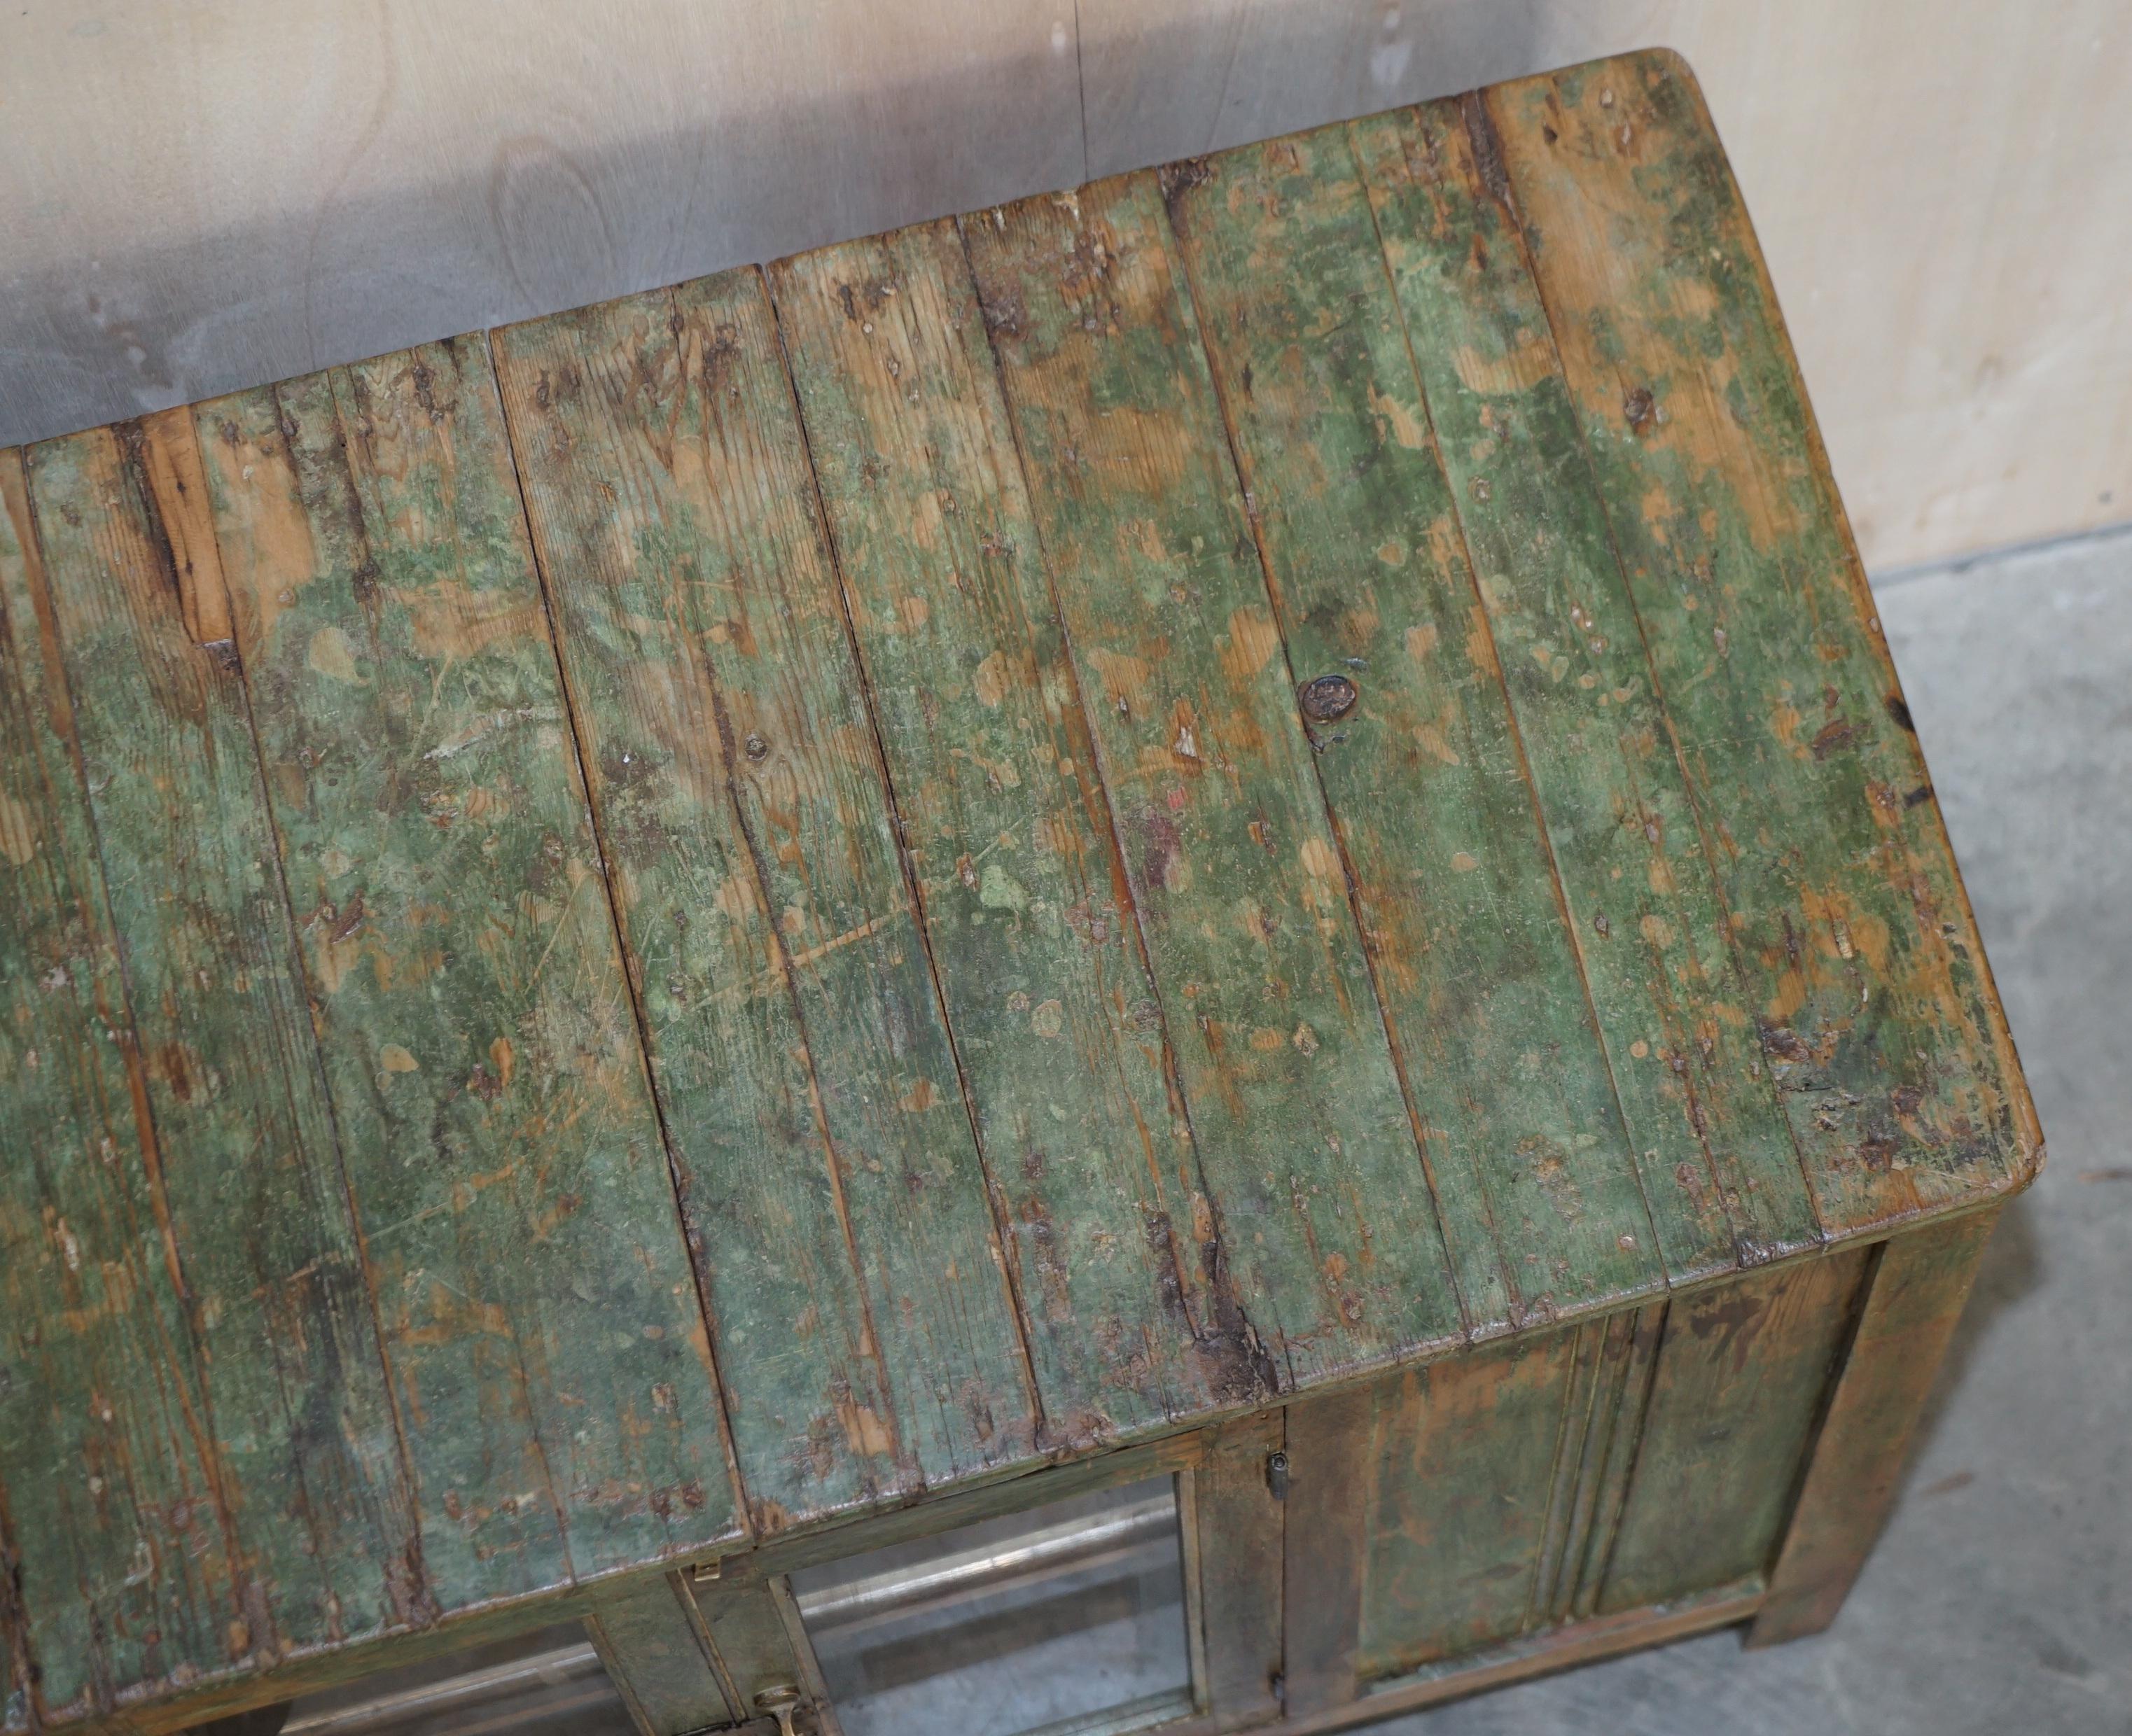 Hardwood Antique circa 1900 Hand Painted Green Distressed Sideboard Cupboard Cabinet